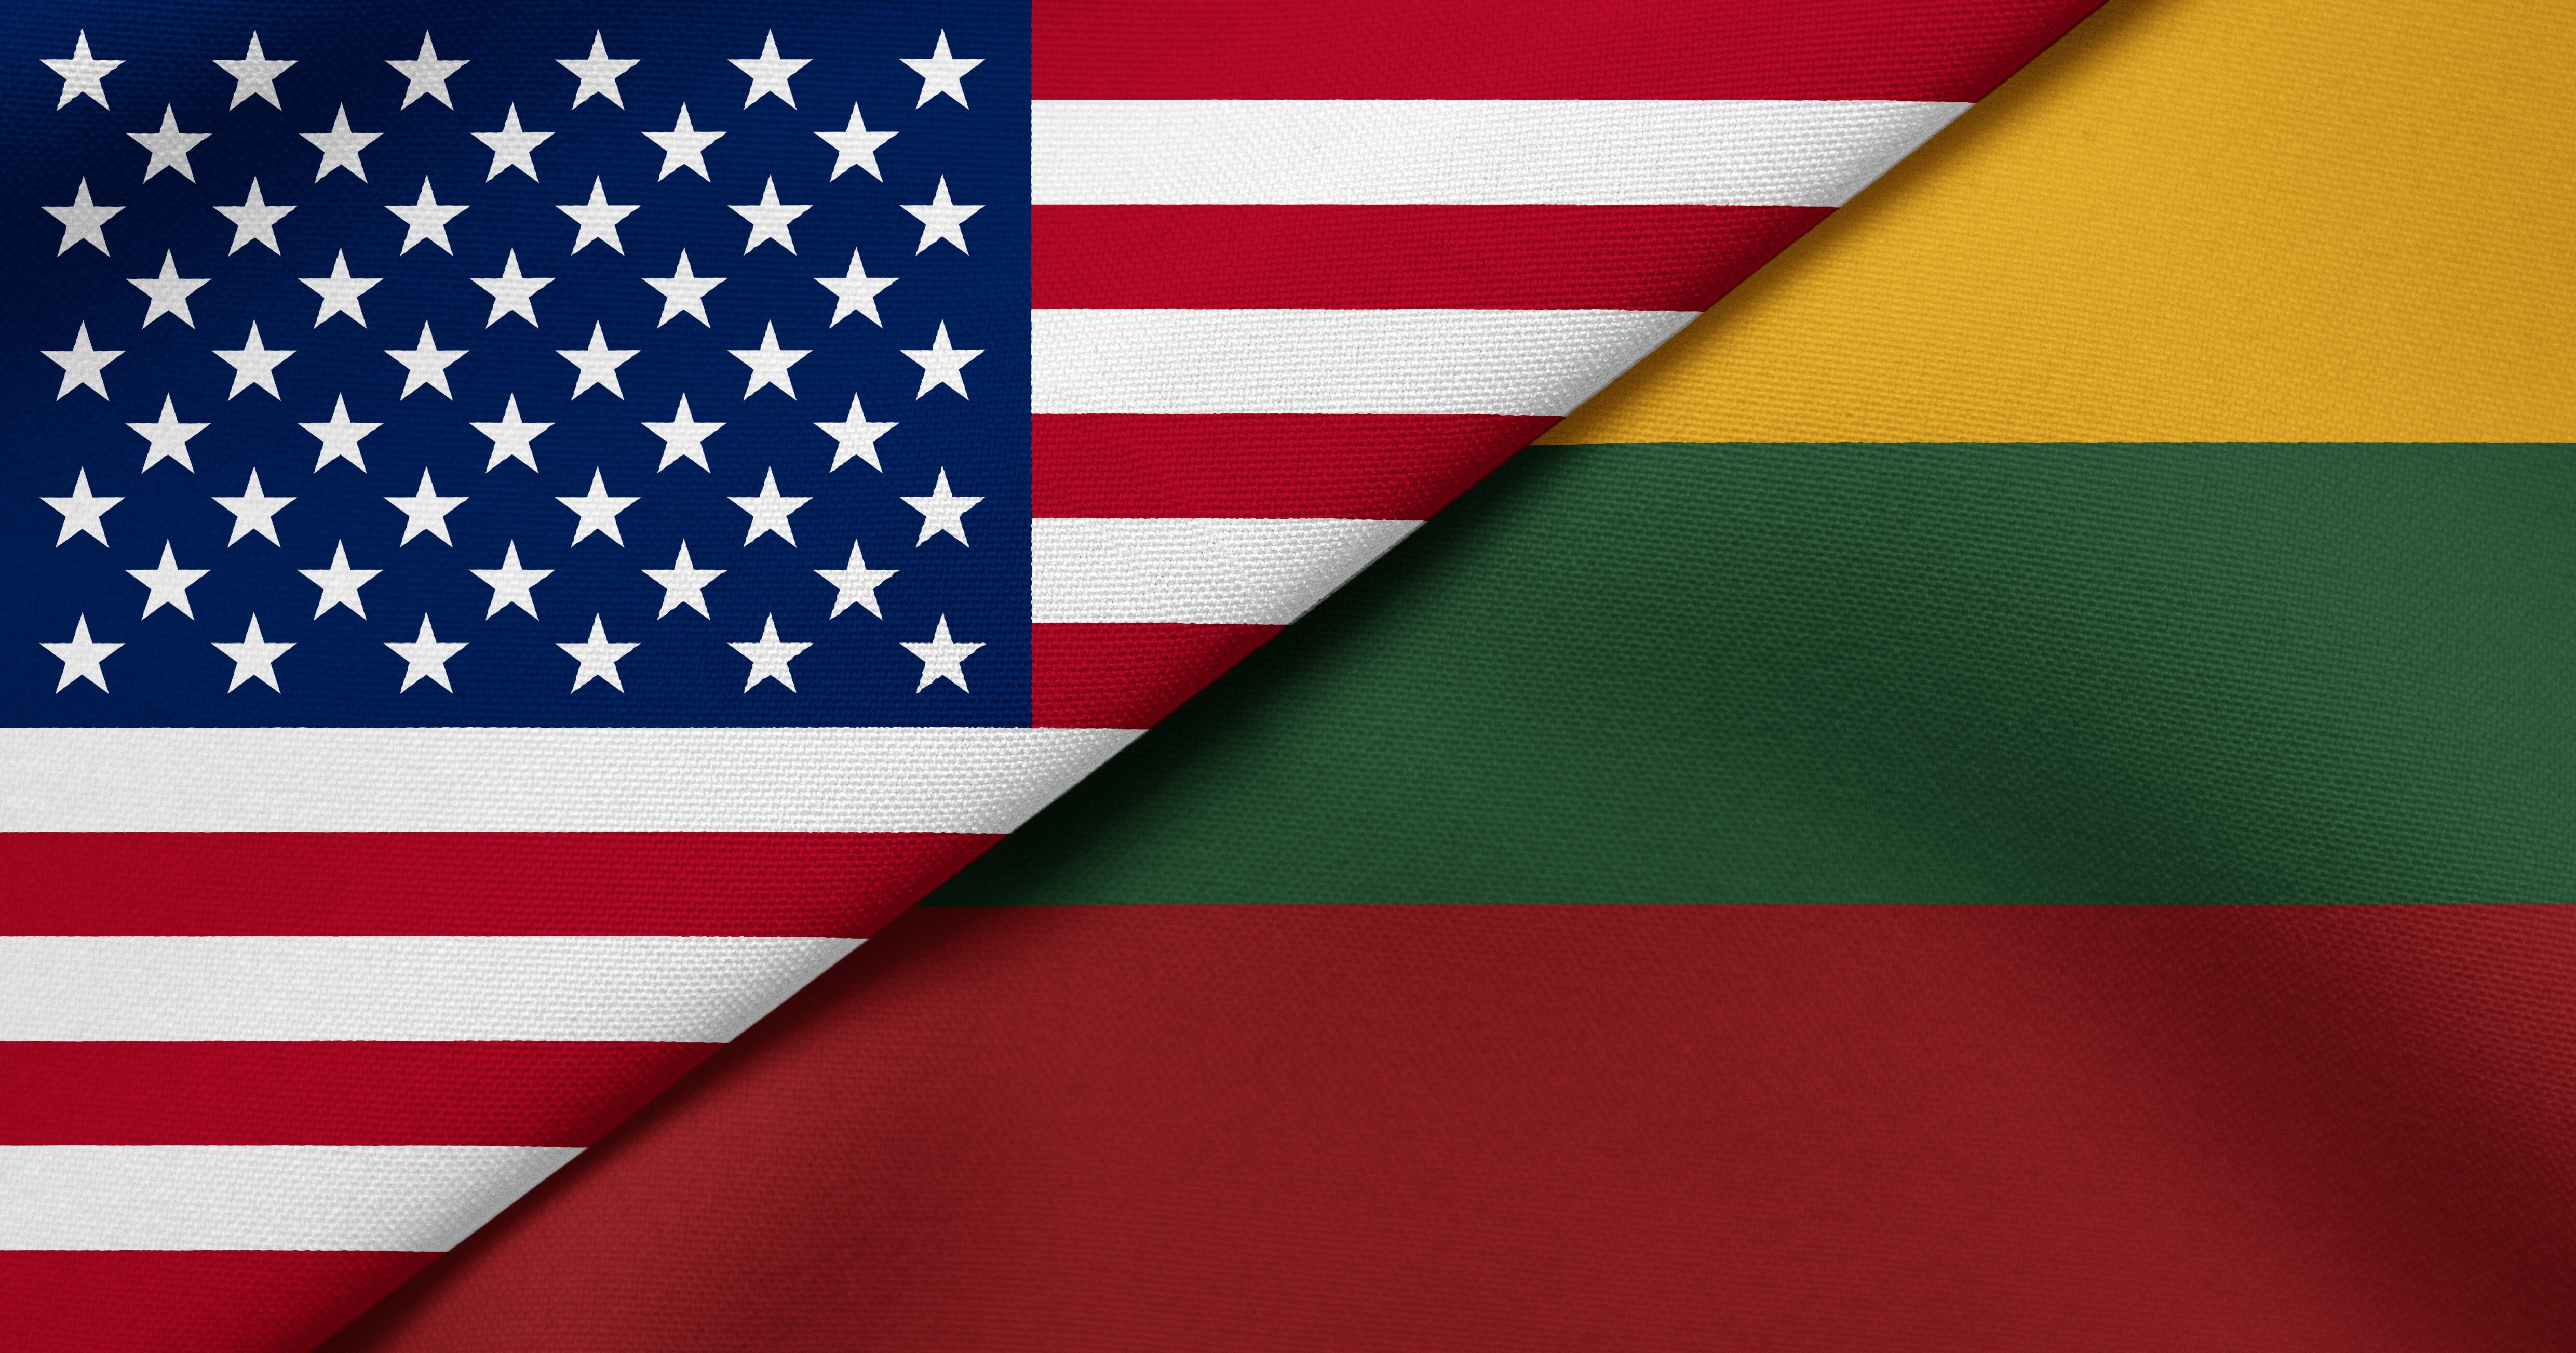 The US says it stands with Lithuania over its decision to foster ties with Taiwan. Photo: Shutterstock